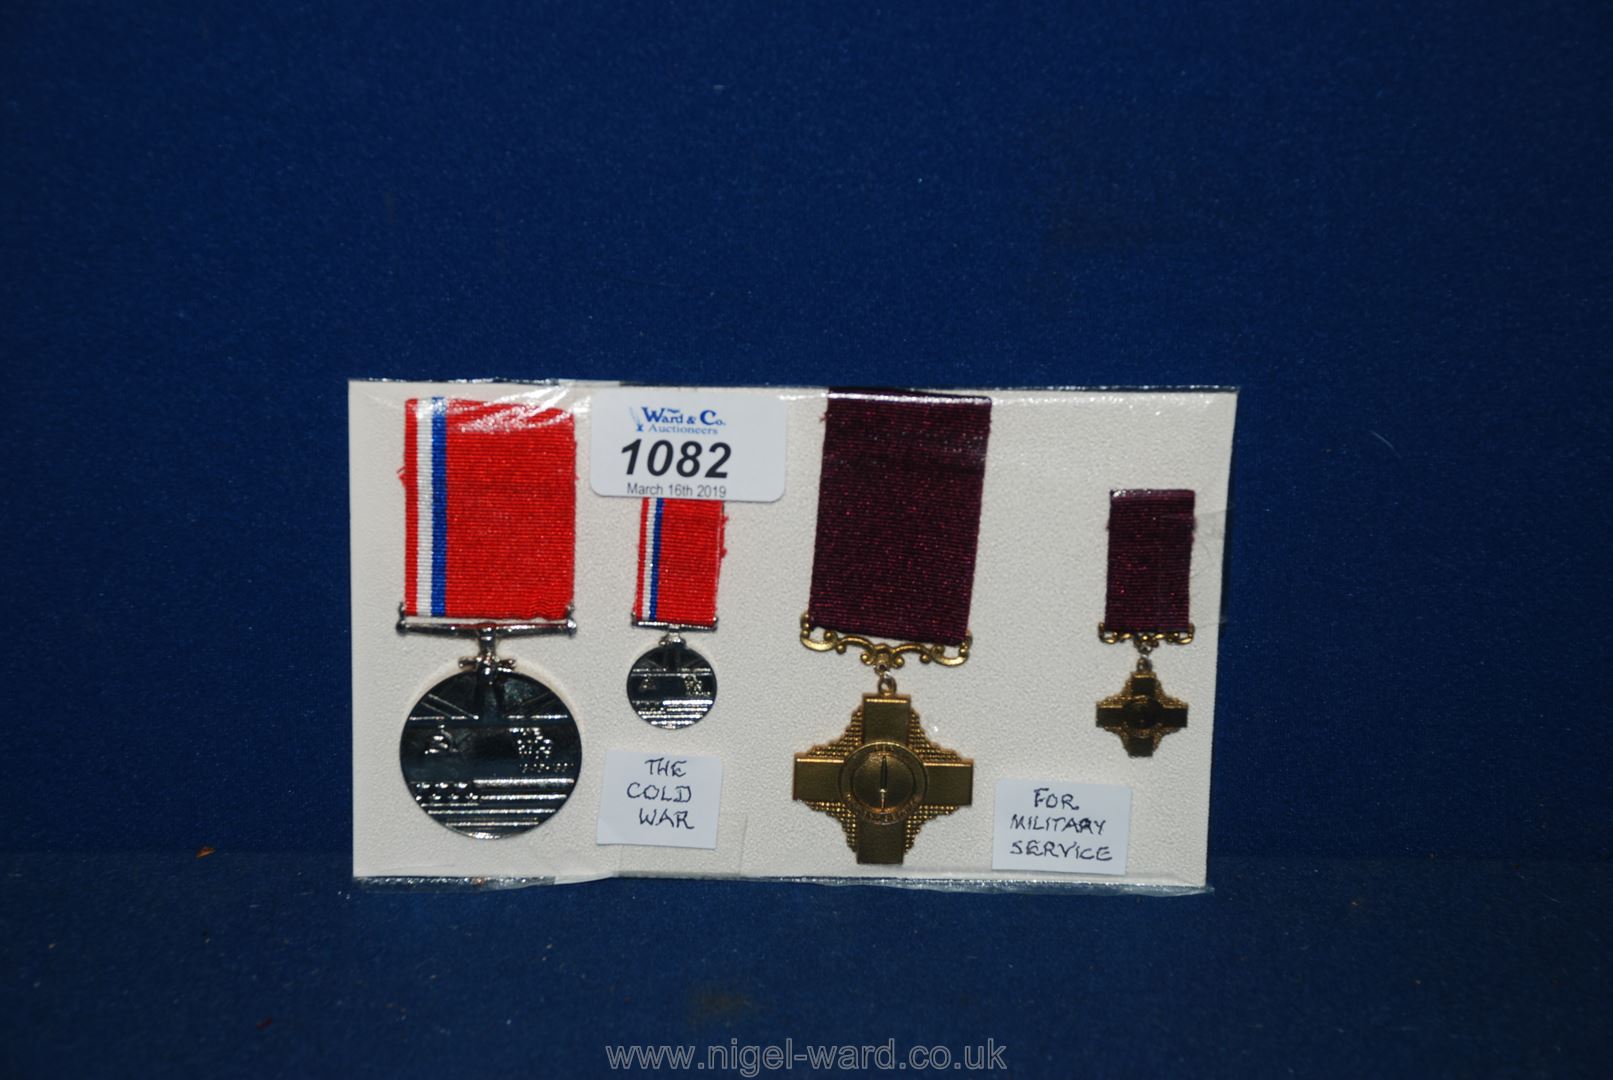 Two commemorative Medals with miniature medals ( The cold war and for Military service),